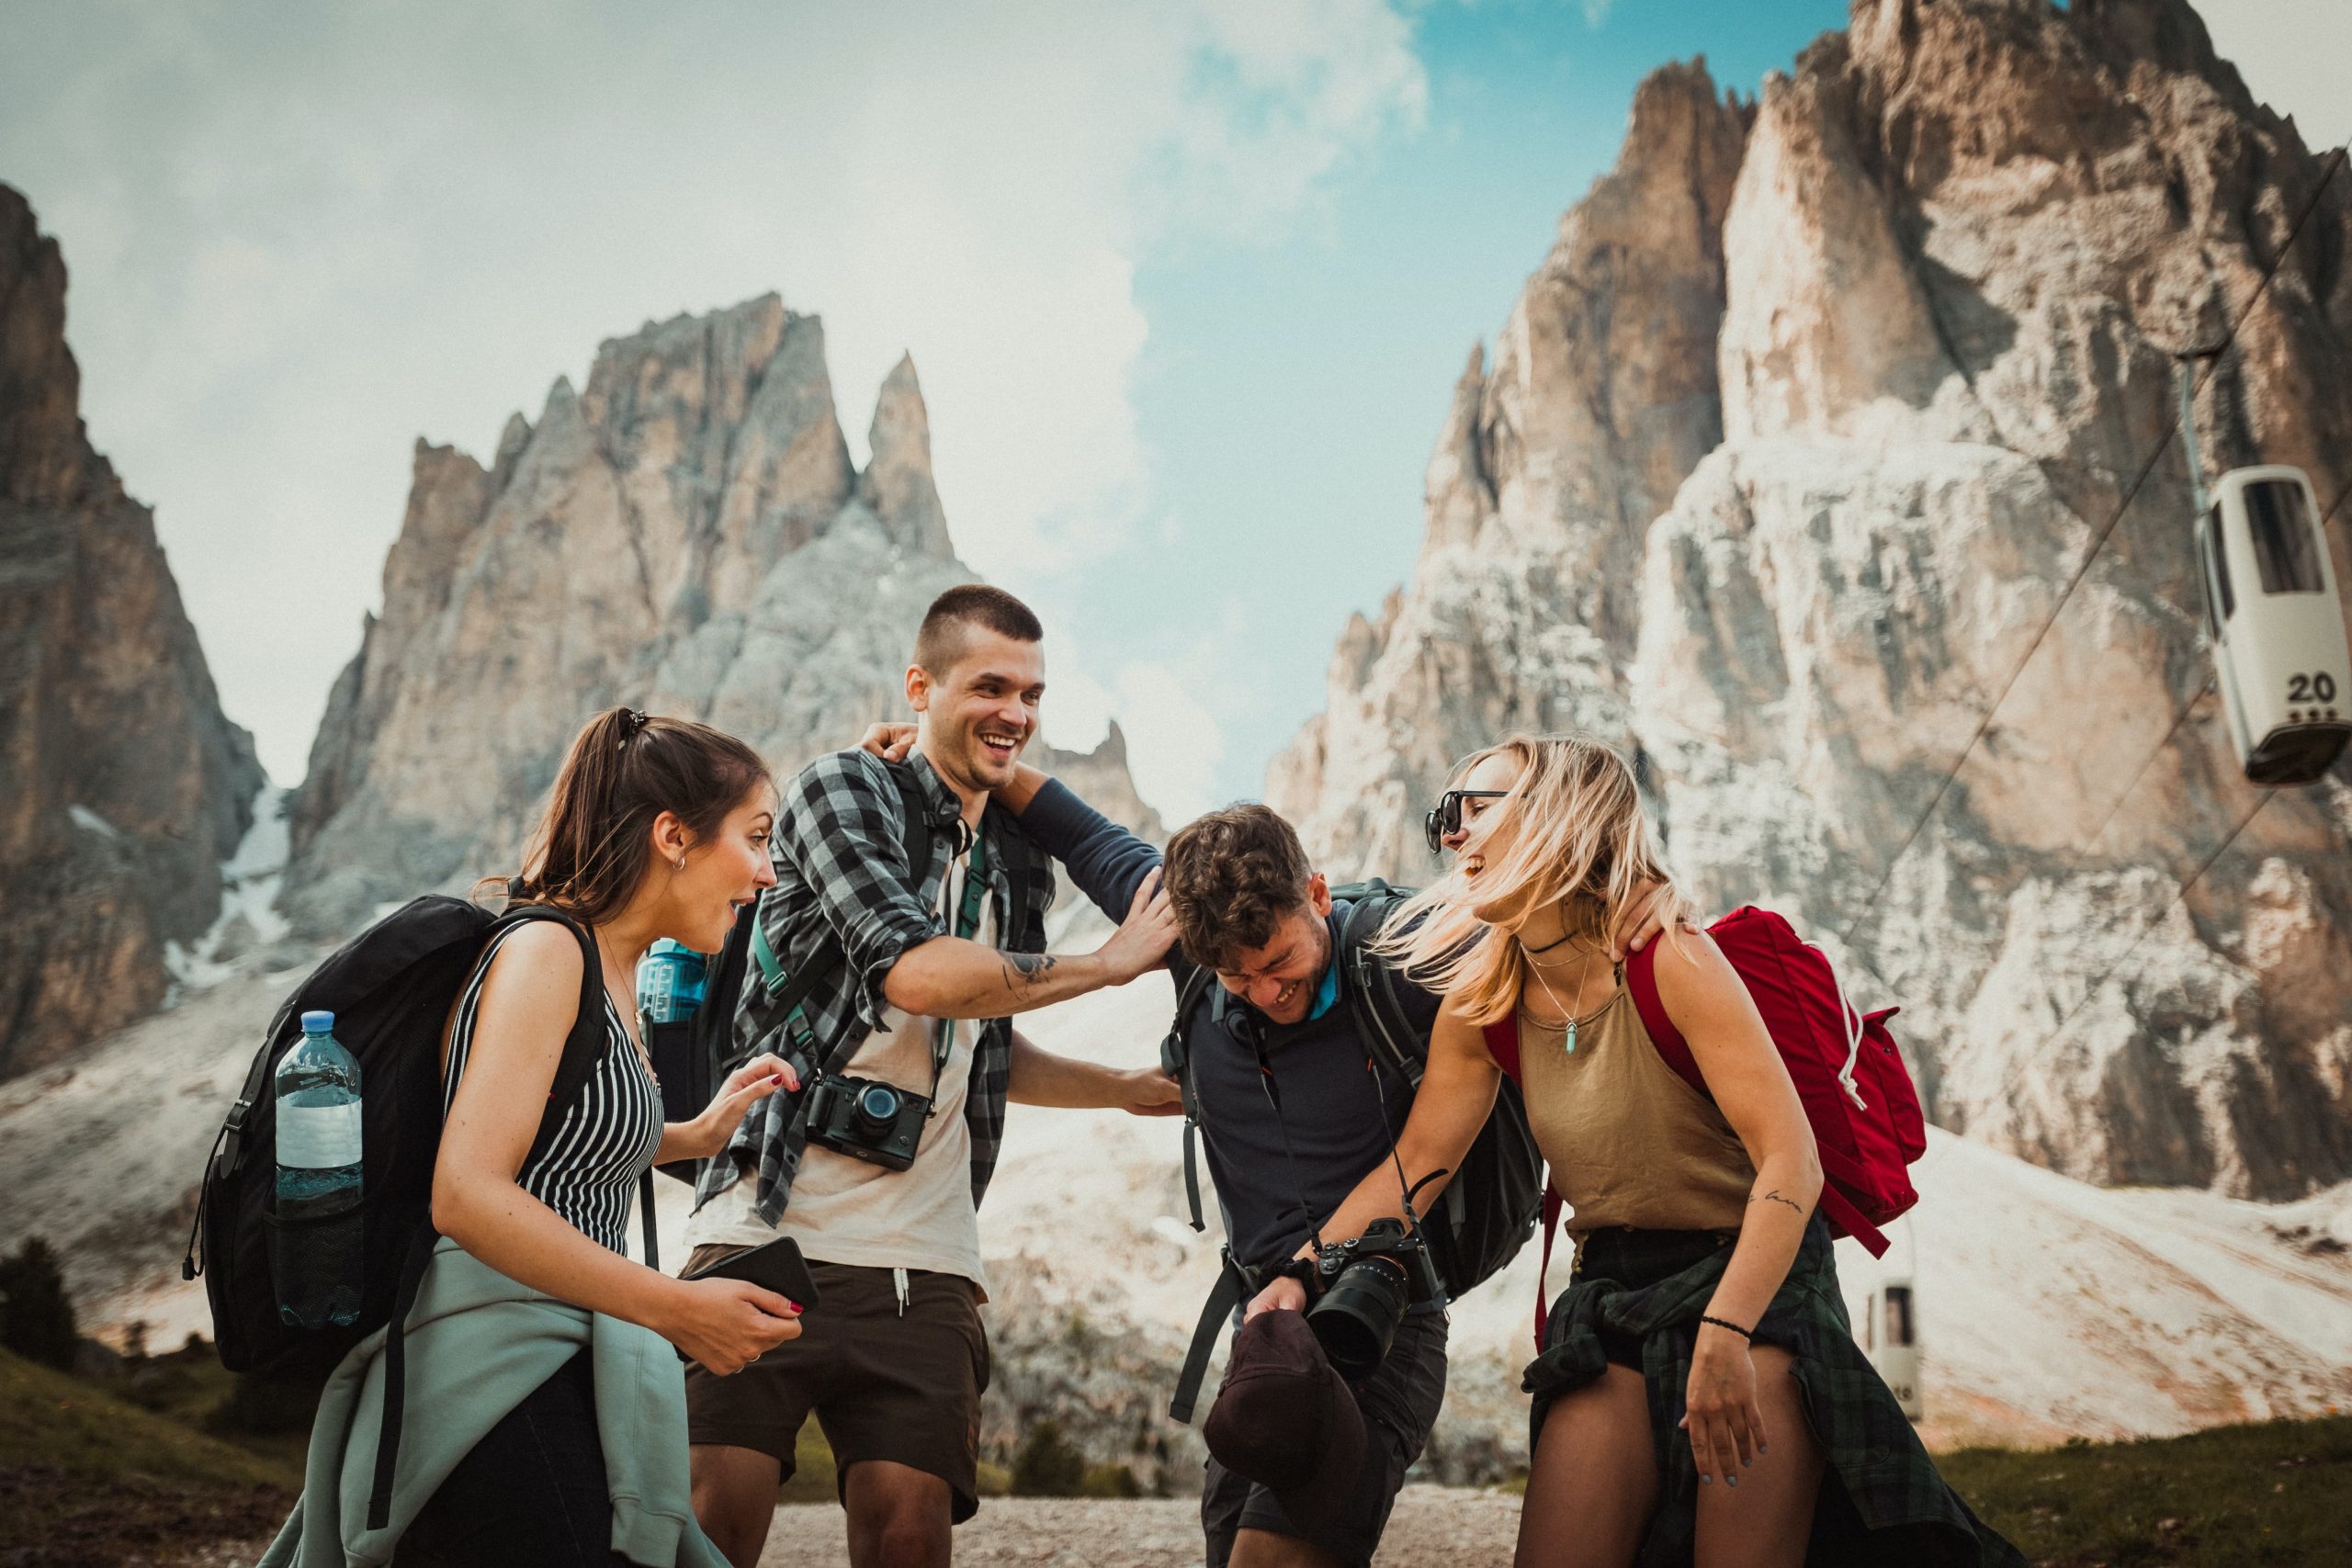 A group of four friends, two girls and two guys, laughing together during an outdoor hike surrounded by mountains.